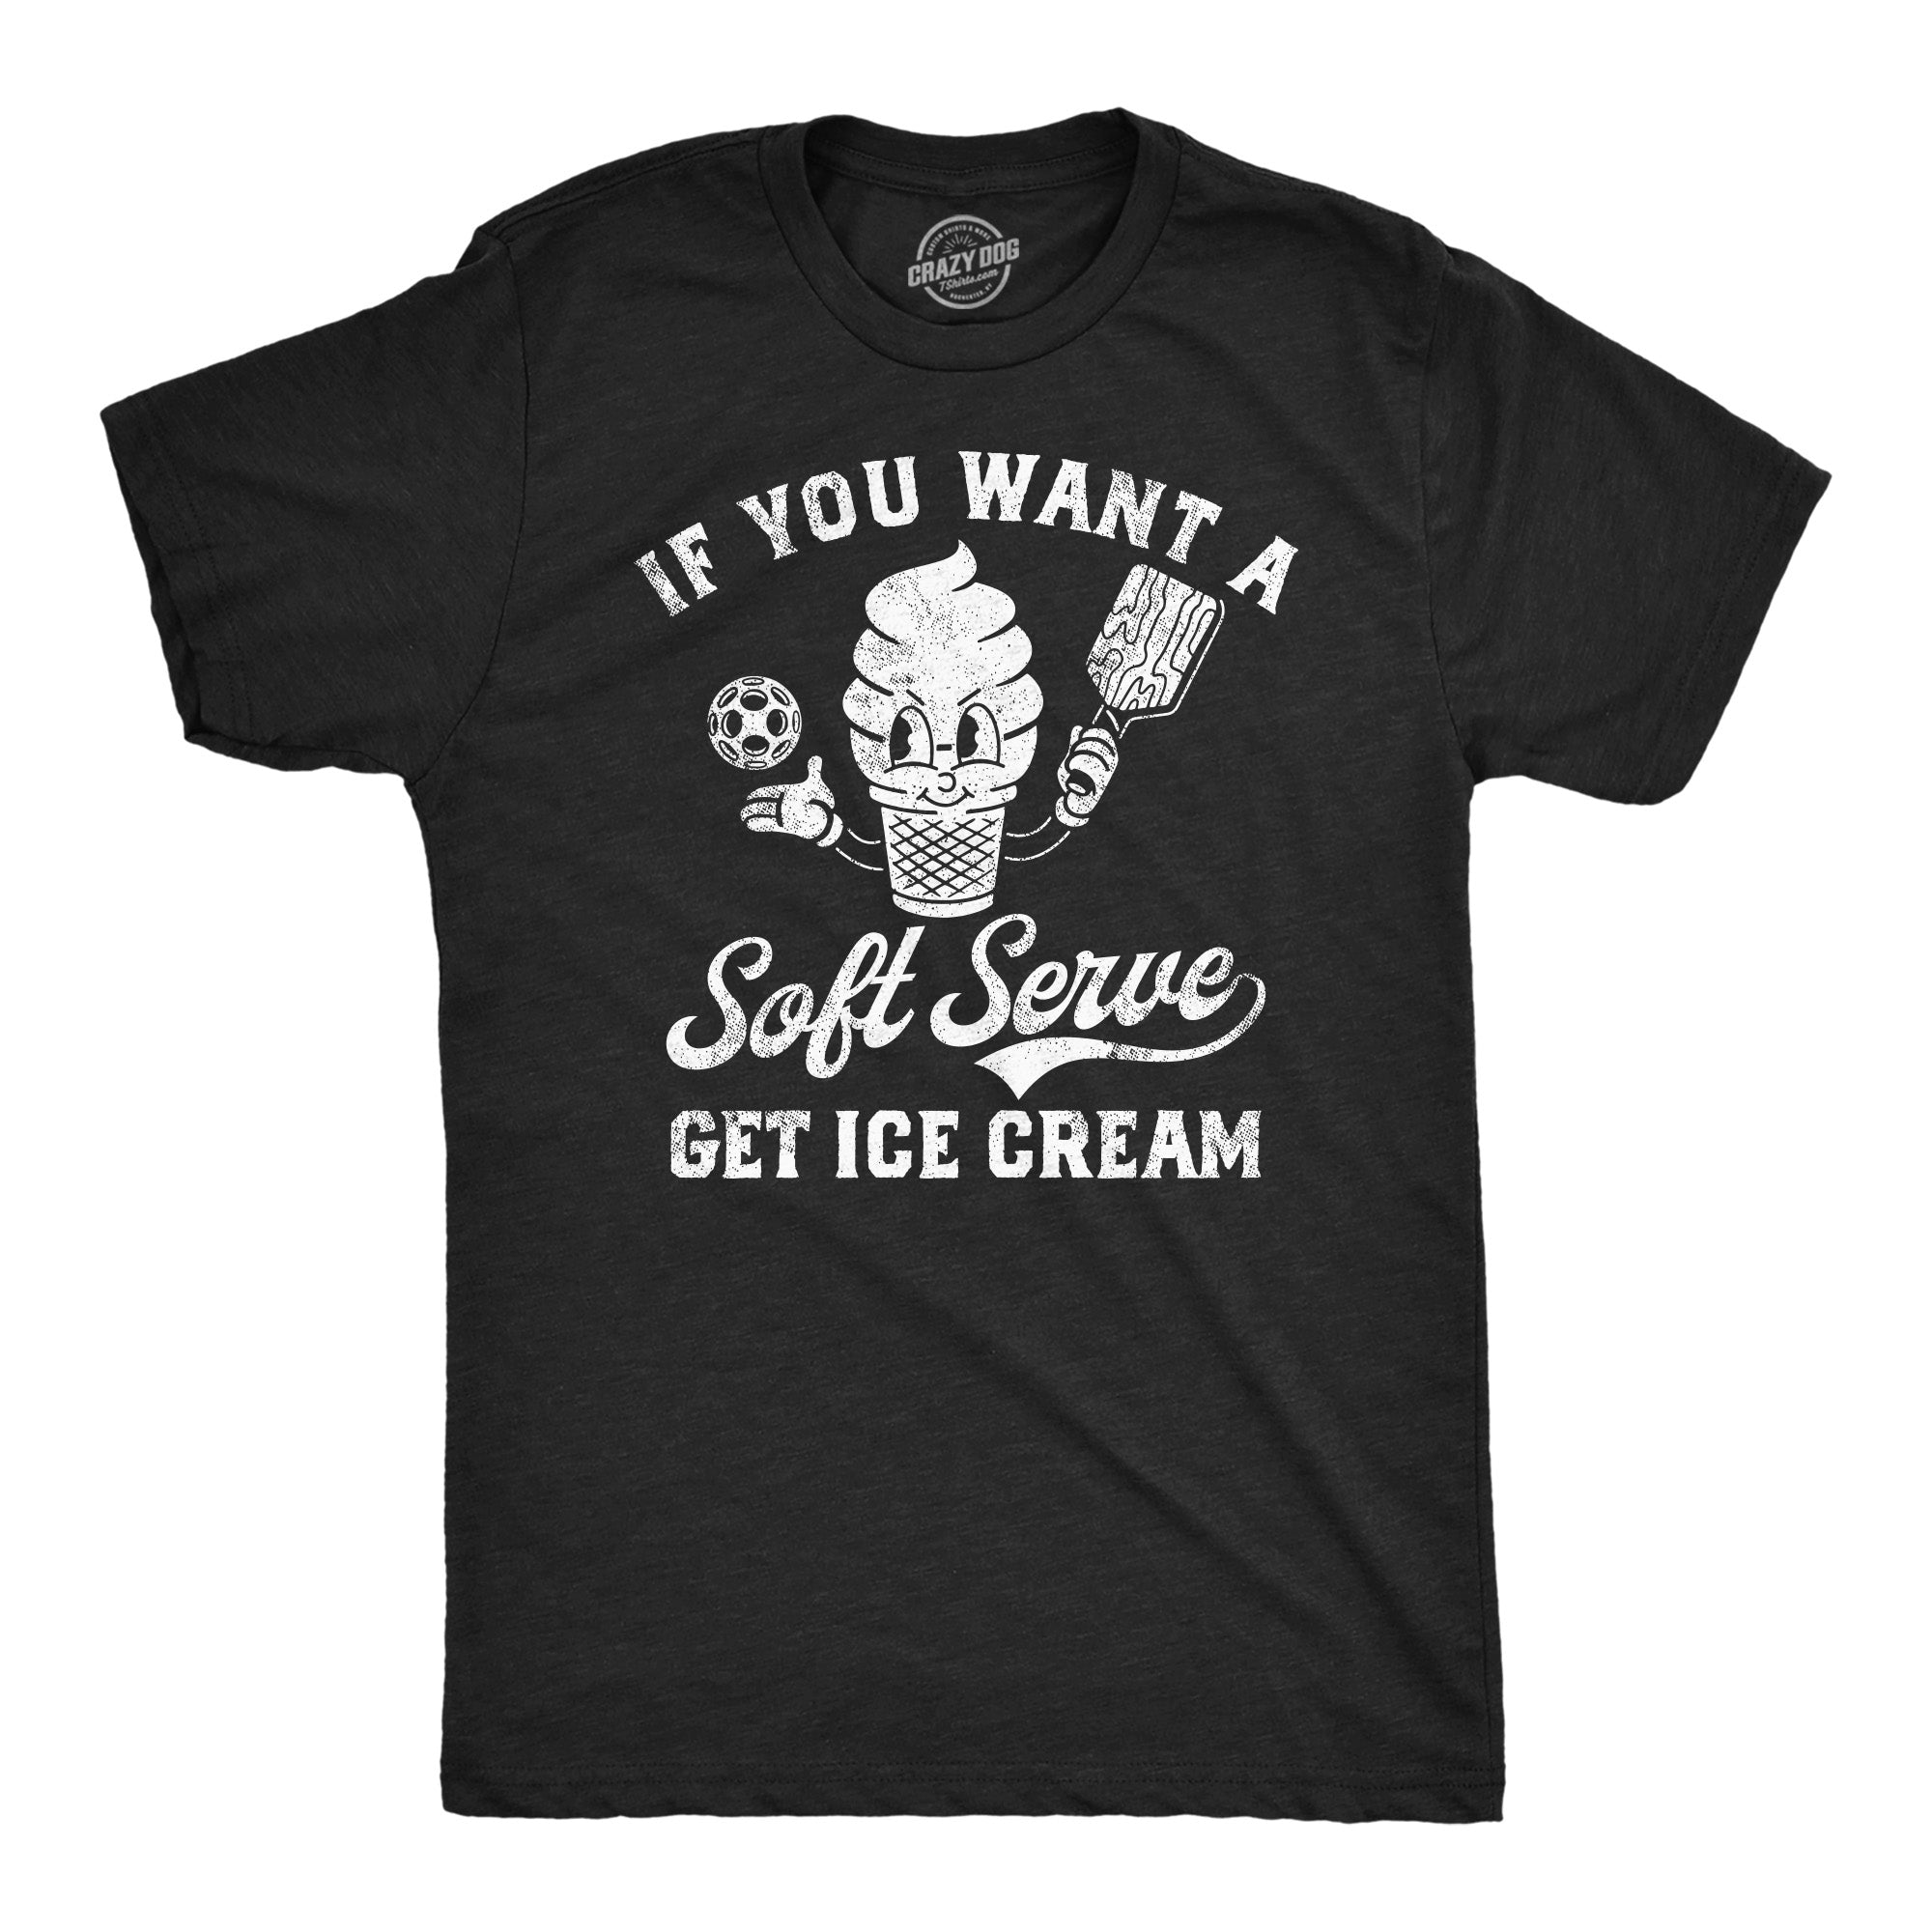 Funny Heather Black - Soft Serve If You Want A Soft Serve Get Ice Cream Mens T Shirt Nerdy Food sarcastic Tee